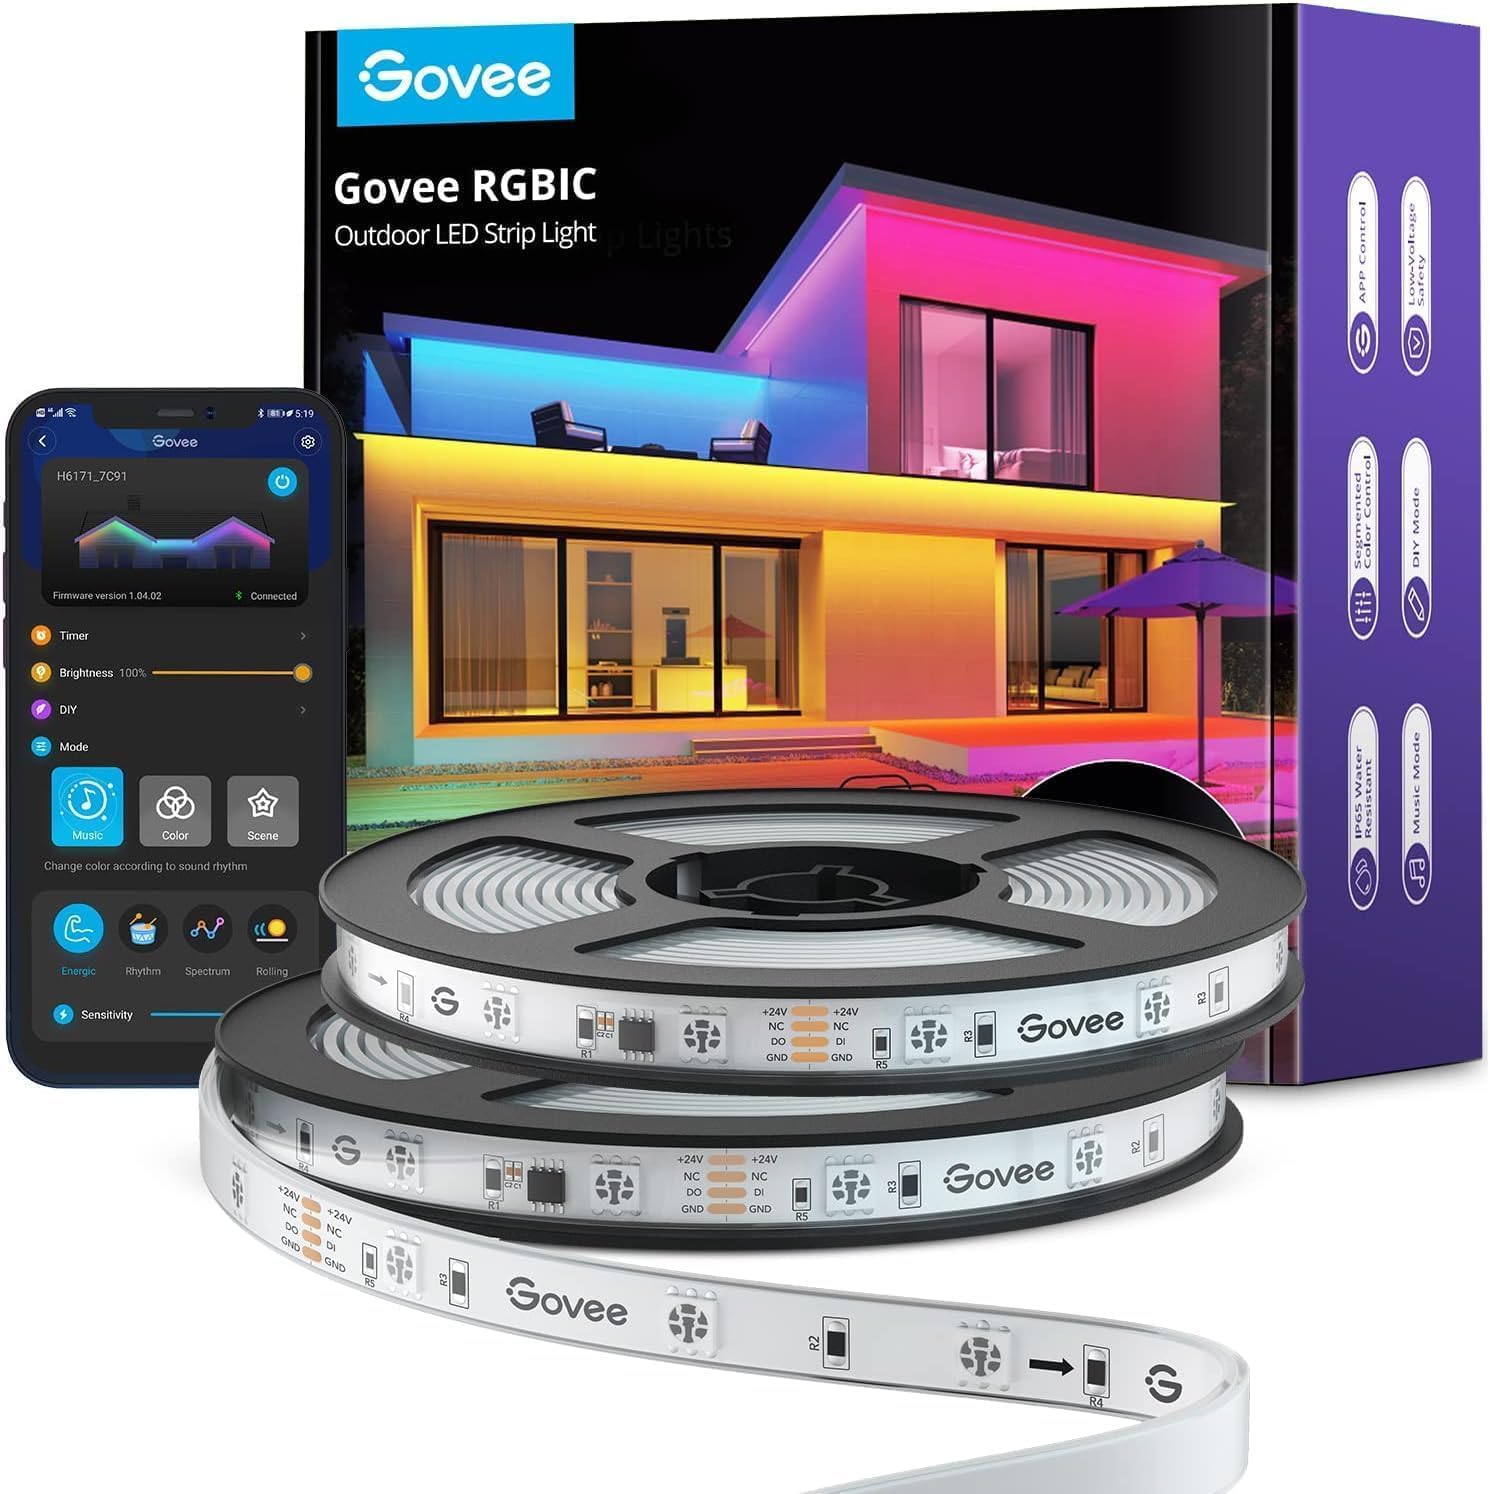 Govee Outdoor LED Strip Lights Waterproof, Connected 2 Rolls of 32.8ft(65.6ft) RGBIC Outdoor Lights, Valentines Day Decorations, Work with Alexa, App Control LED Outdoor Lights for Eave, Roof, Party